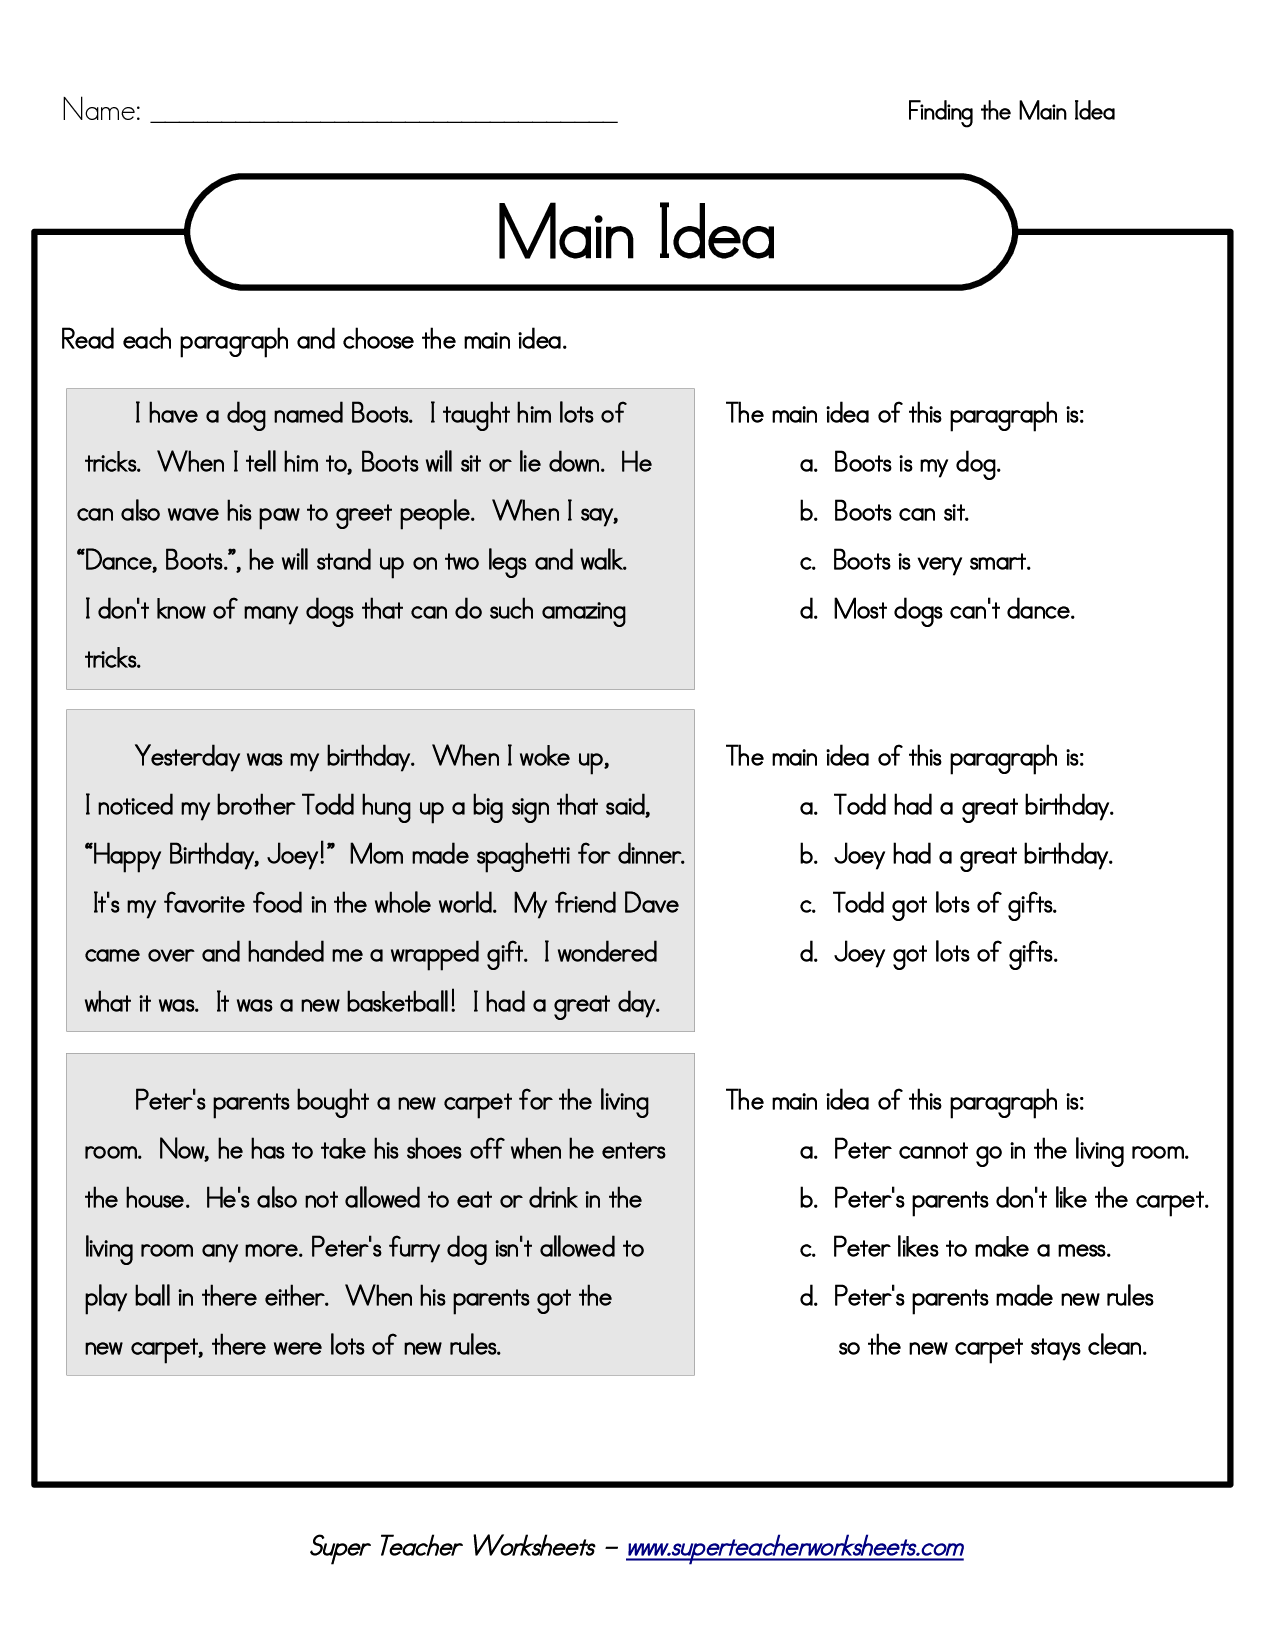 15 Best Images of Main Idea Supporting Detail Worksheets  Main Idea Passages Nonfiction, Main 